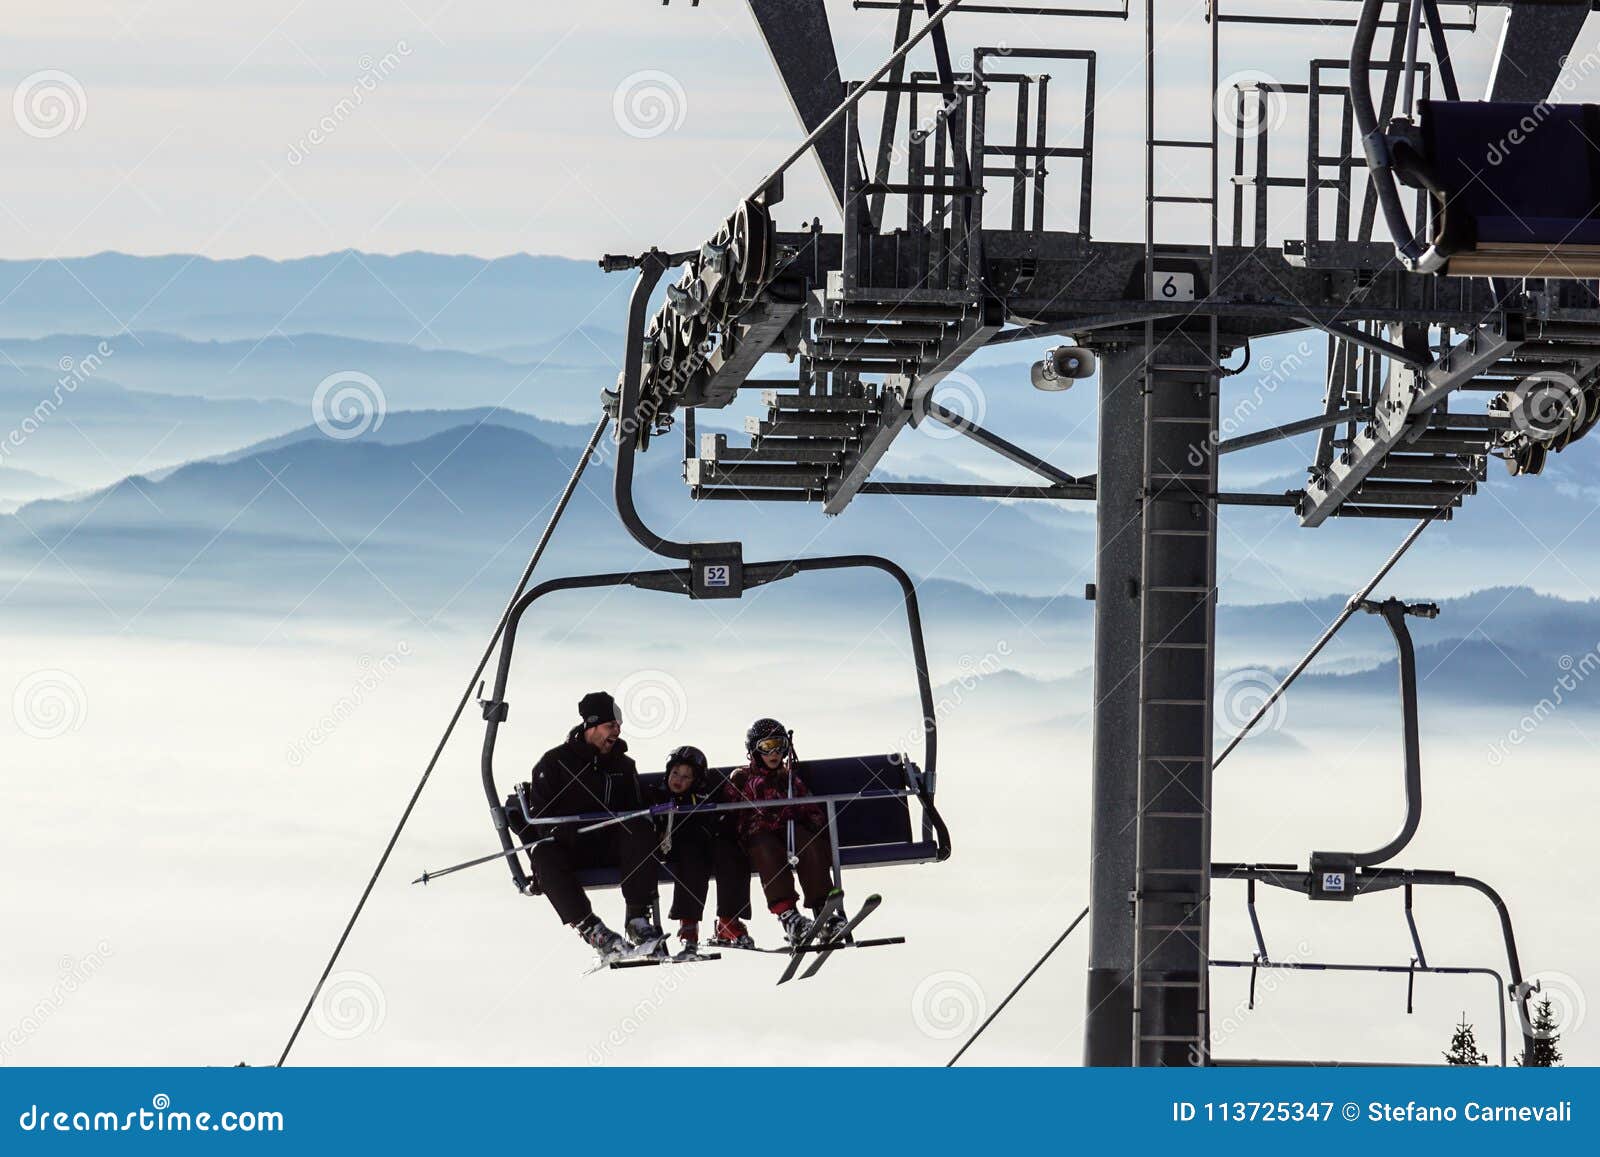 Ski Lift Cable Car Funicular With Open Cabin On The Background Editorial Image Cartoondealer 